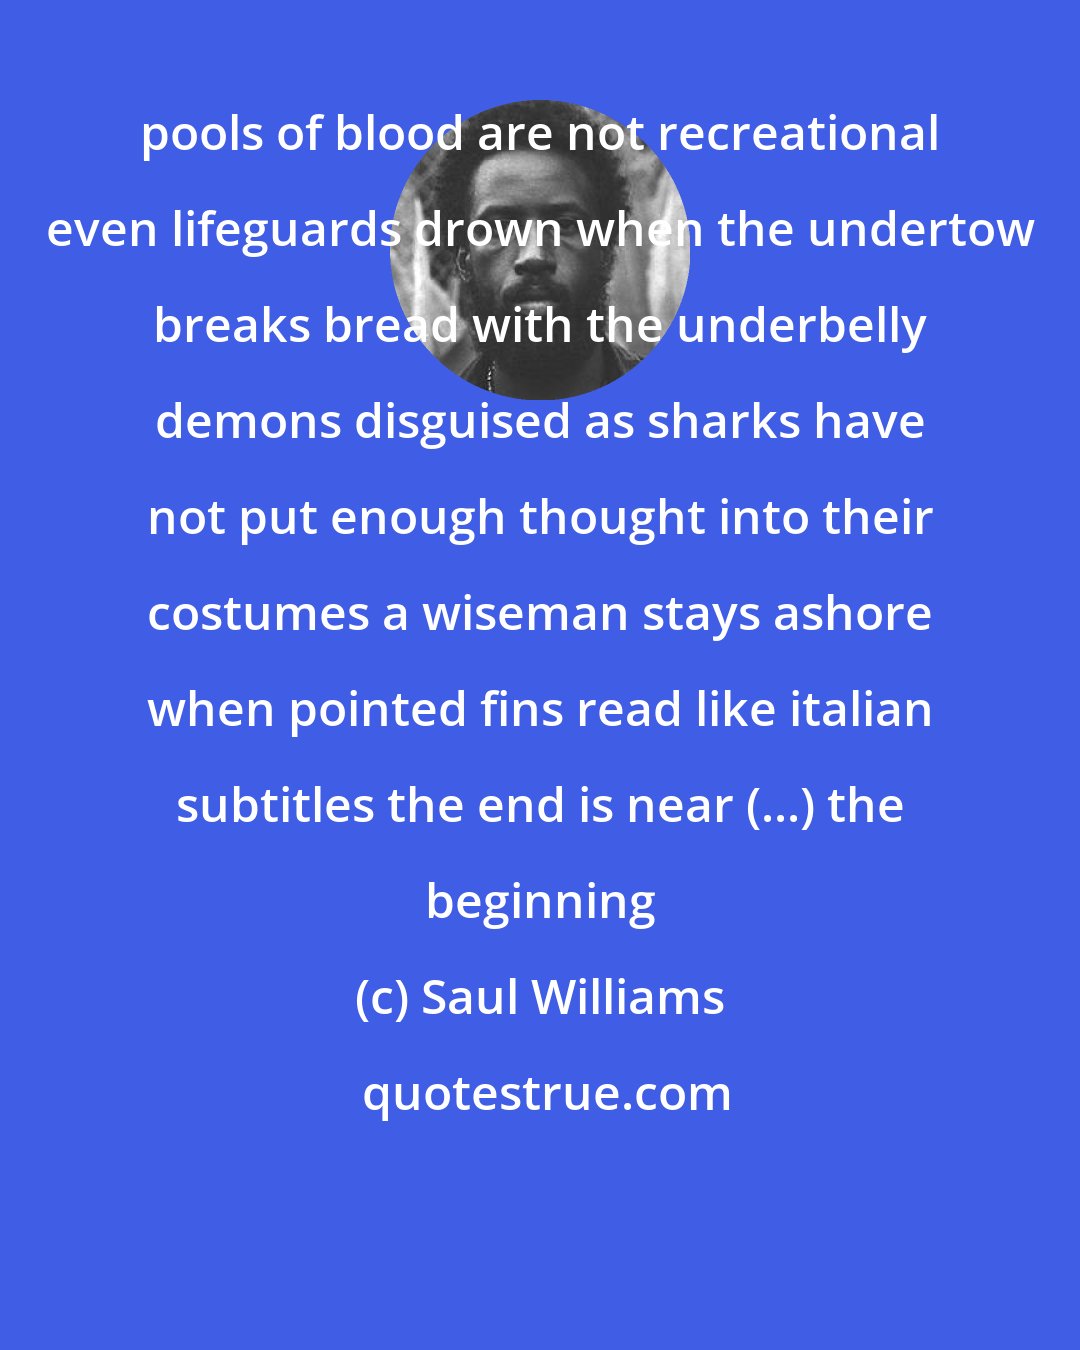 Saul Williams: pools of blood are not recreational even lifeguards drown when the undertow breaks bread with the underbelly demons disguised as sharks have not put enough thought into their costumes a wiseman stays ashore when pointed fins read like italian subtitles the end is near (...) the beginning